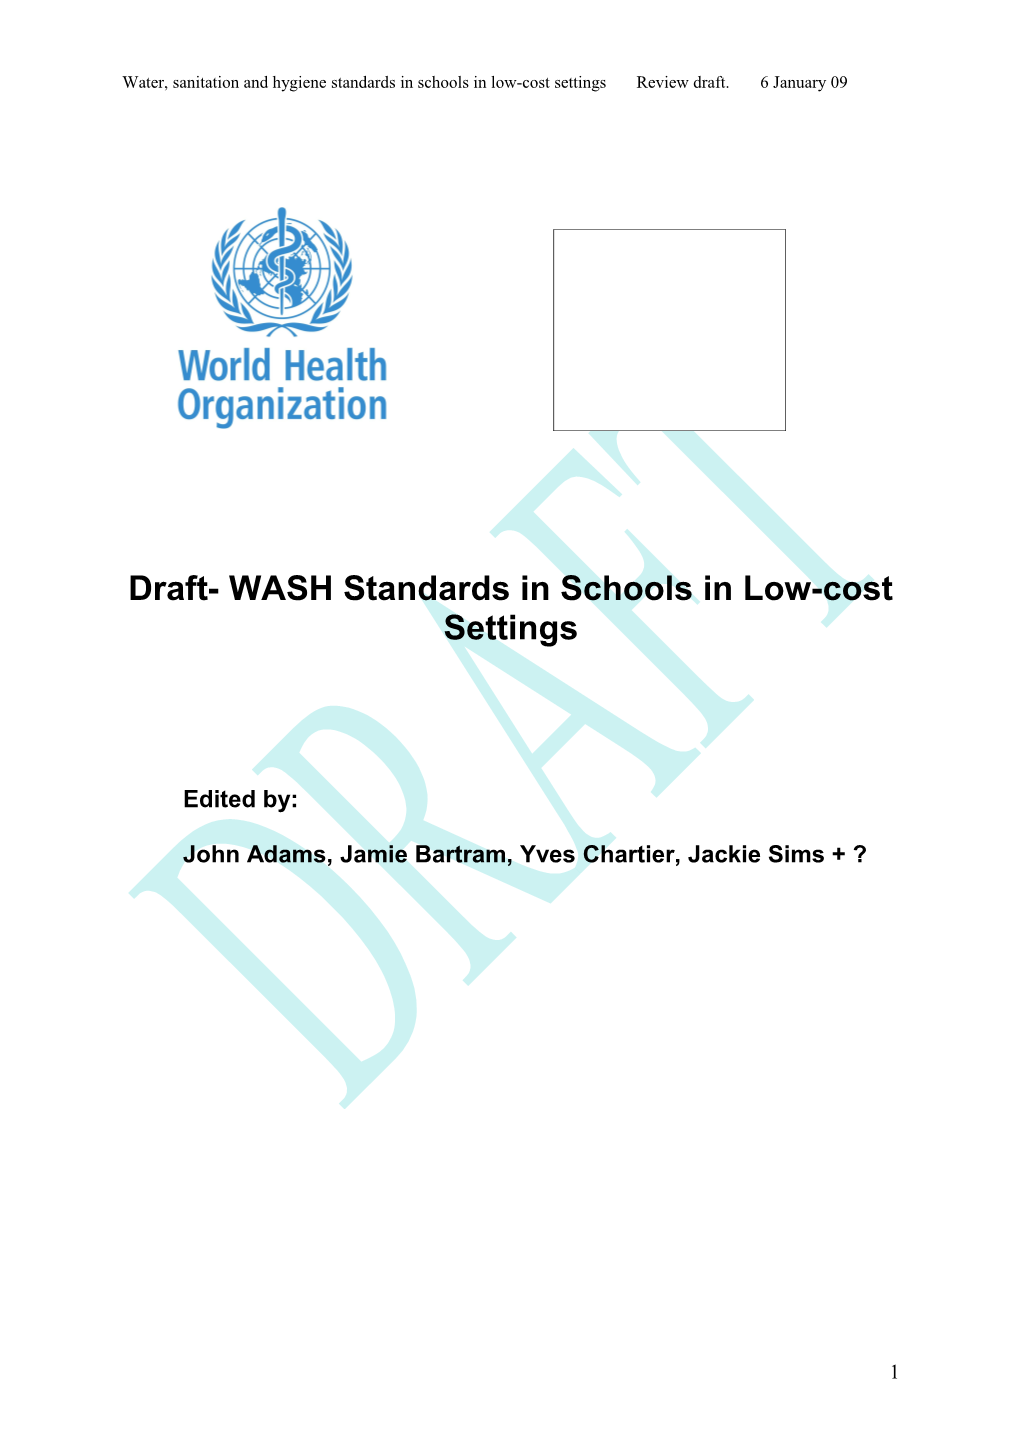 Water, Sanitation and Hygiene Standards in Schools in Low-Cost Settings